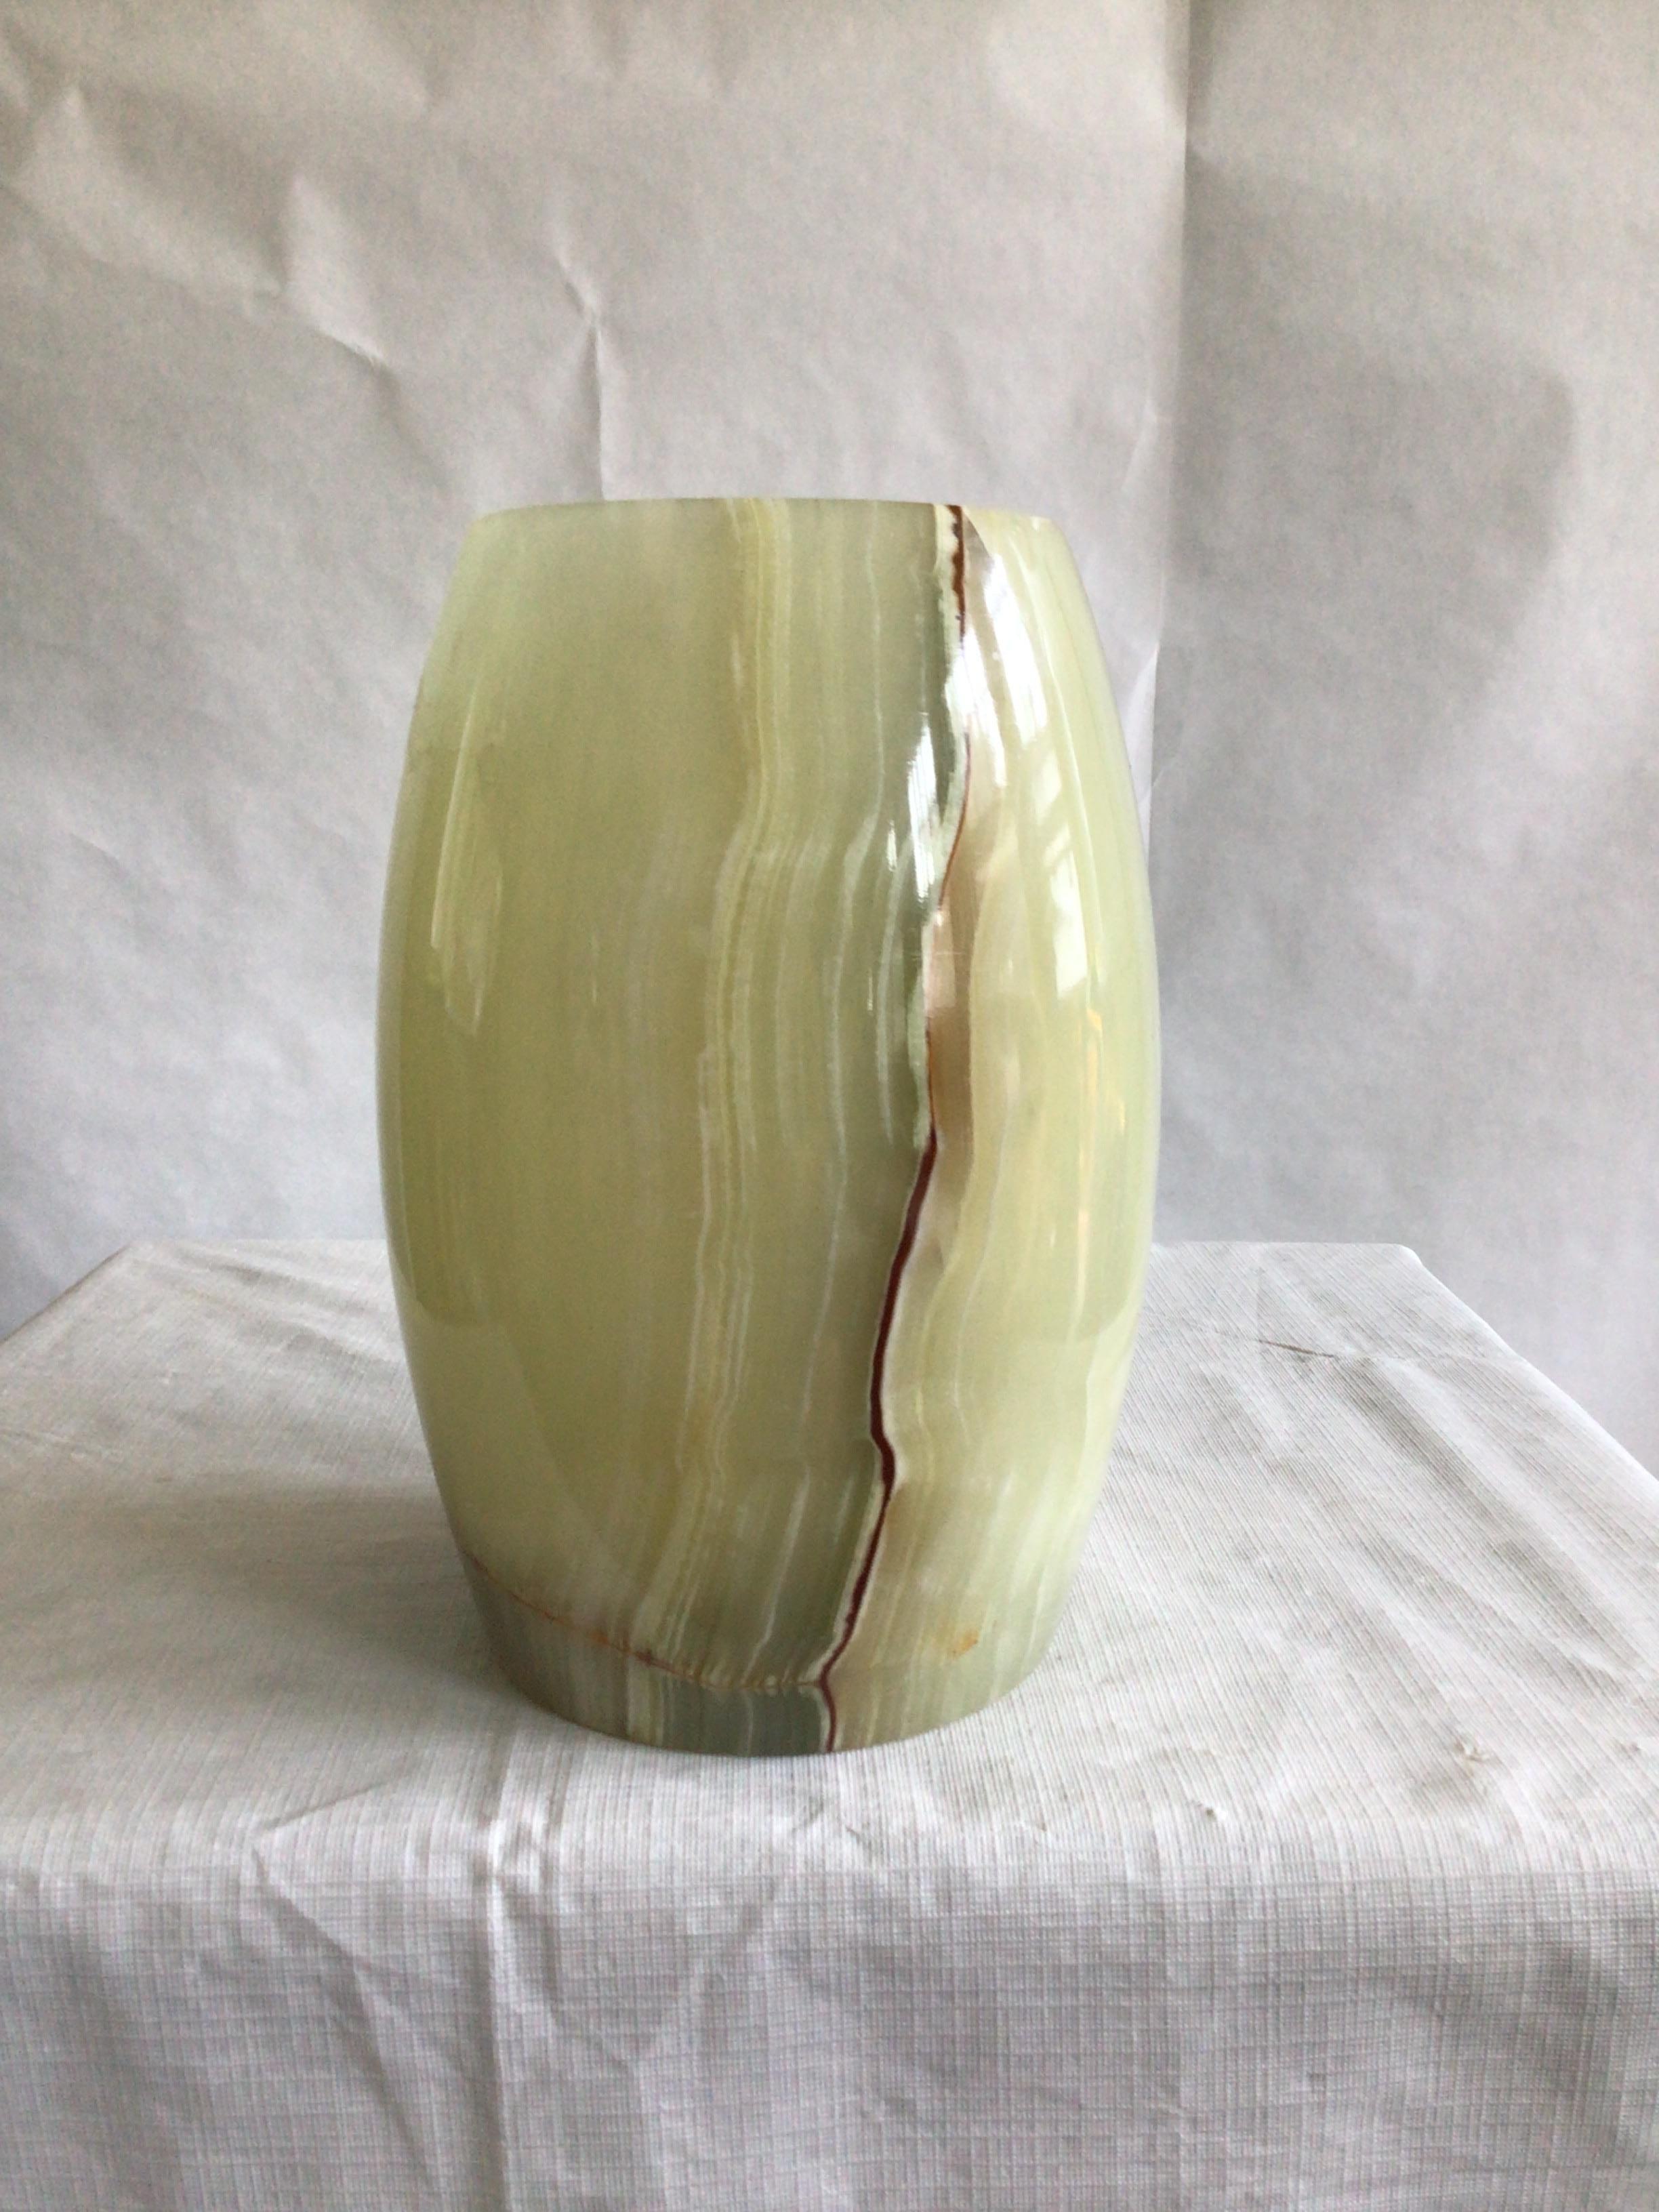 1960s Natural Onyx Stone Tabletop Lamp
This lamp has some heft for it's size
Onyx is a semiprecious and translucent stone with color ranging from white to deep greens and browns - the beauty of the stone is highlighted when illuminated from inside